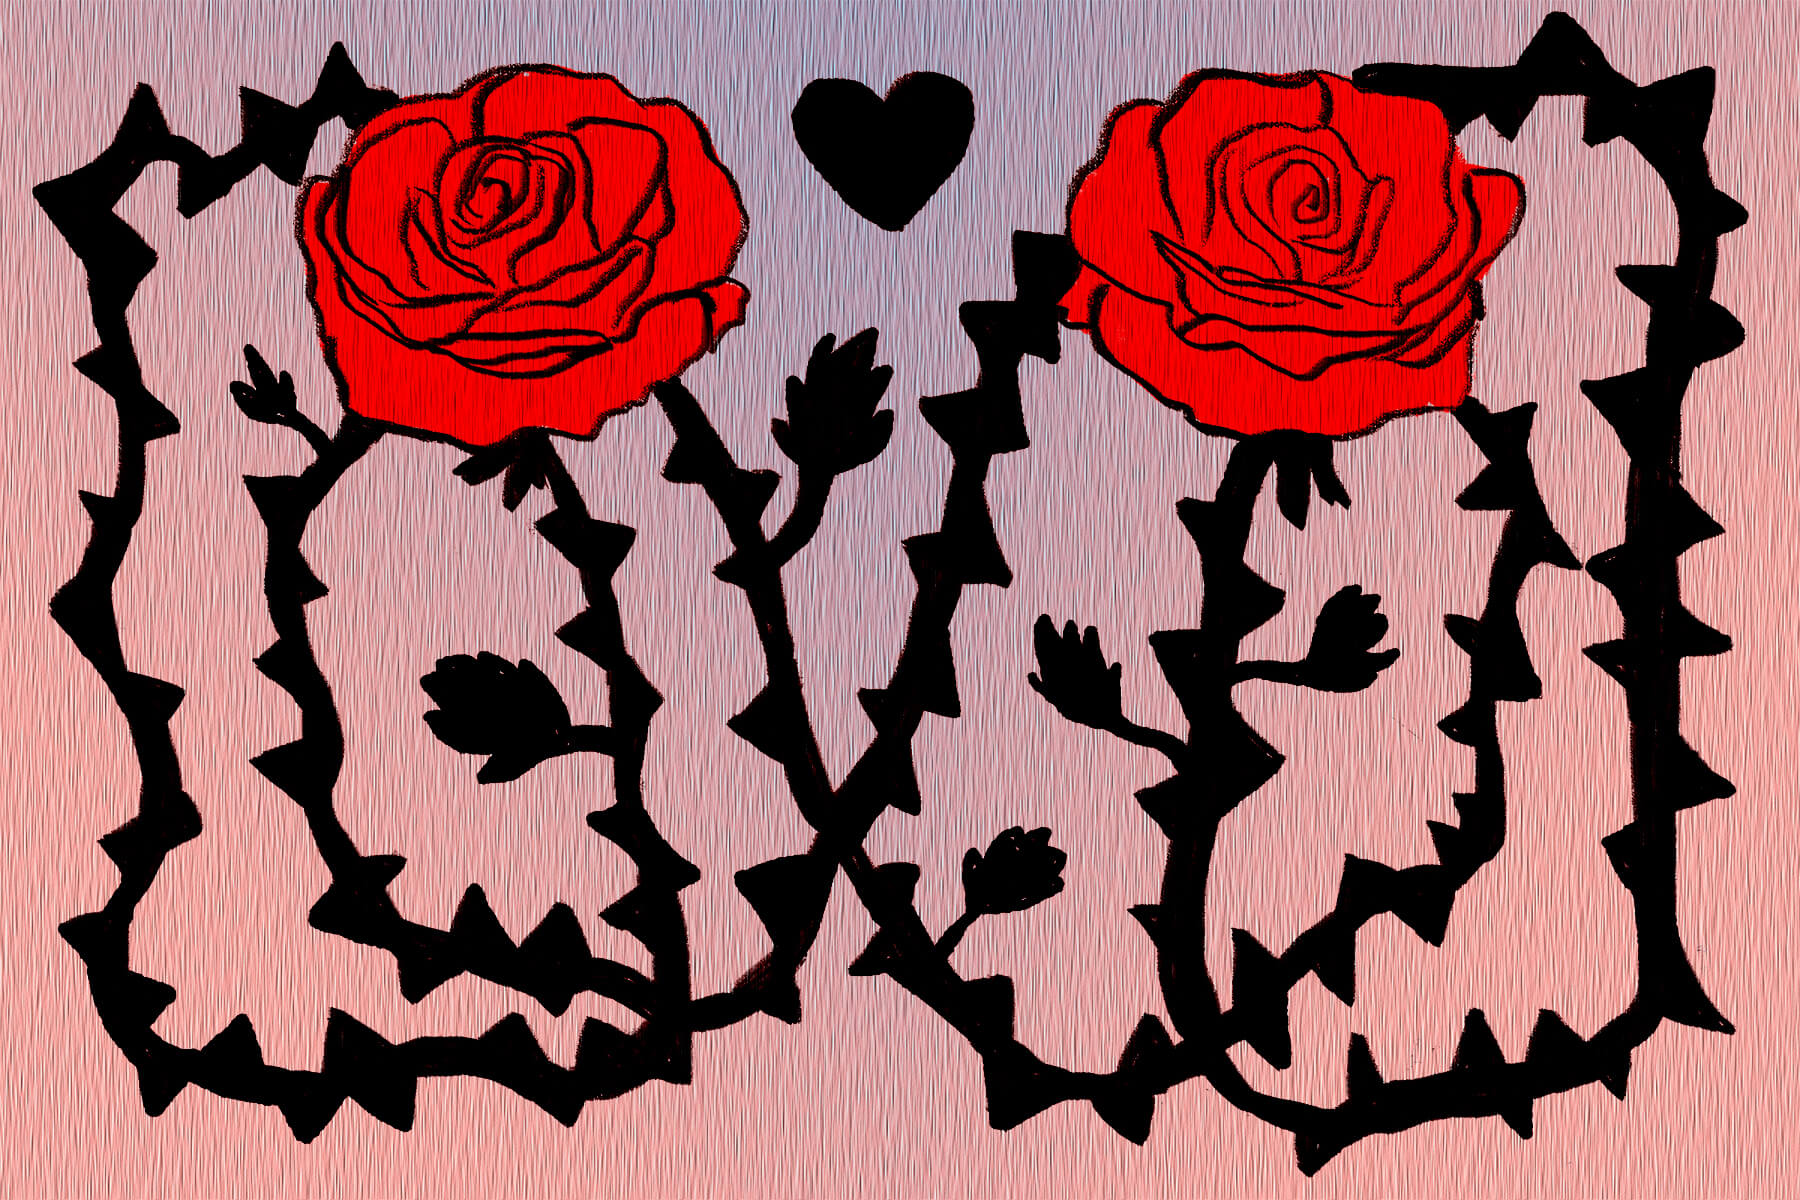 Illustration by Marlowe Pody for an article on A Court of Thorns and Roses